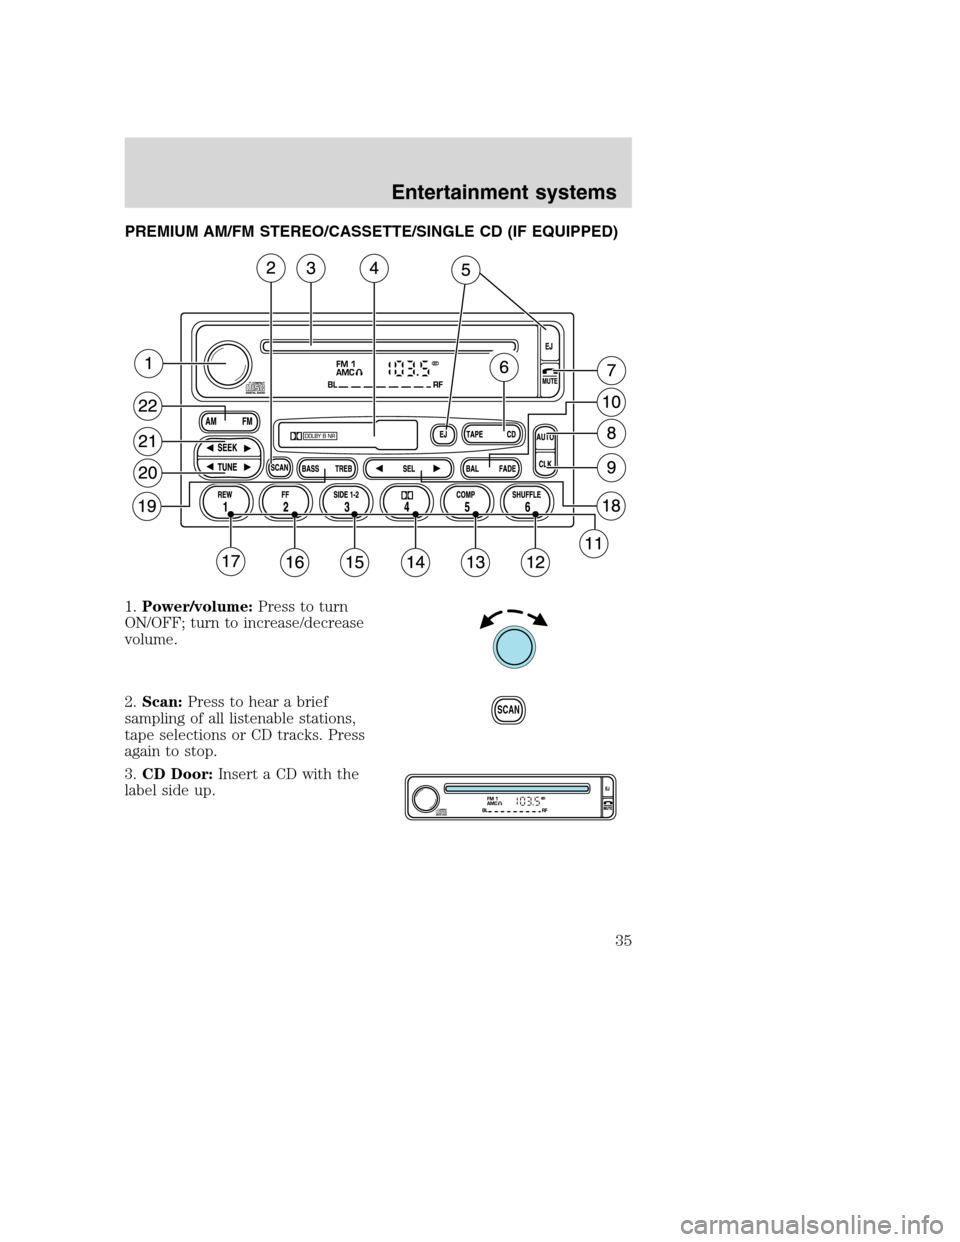 FORD F650 2005 11.G Owners Guide PREMIUM AM/FM STEREO/CASSETTE/SINGLE CD (IF EQUIPPED)
1.Power/volume:Press to turn
ON/OFF; turn to increase/decrease
volume.
2.Scan:Press to hear a brief
sampling of all listenable stations,
tape sele